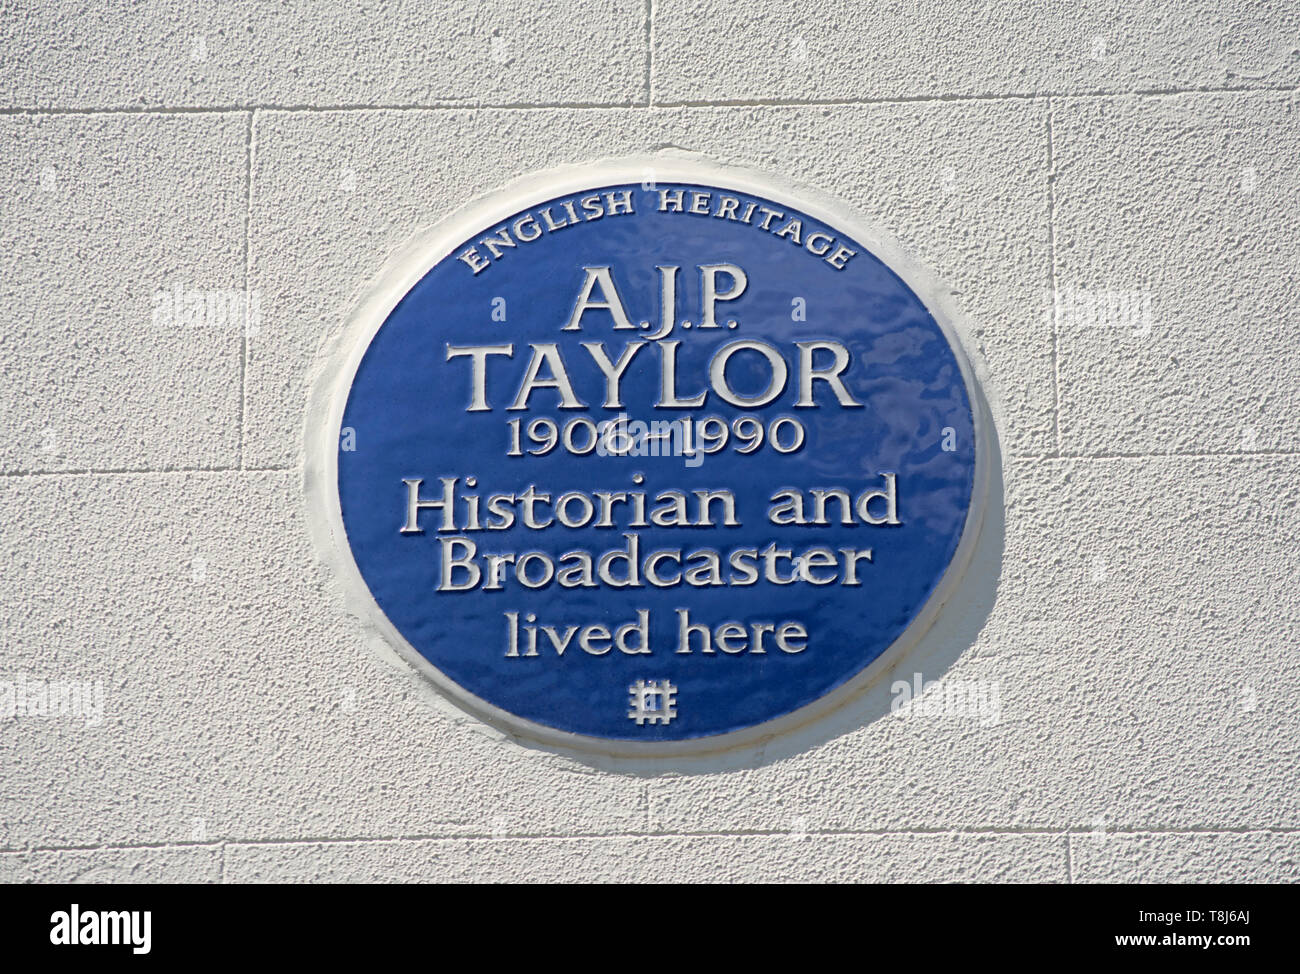 english heritage blue plaque marking a home of historian and broadcaster ajp taylor, primrose hill, london, england Stock Photo